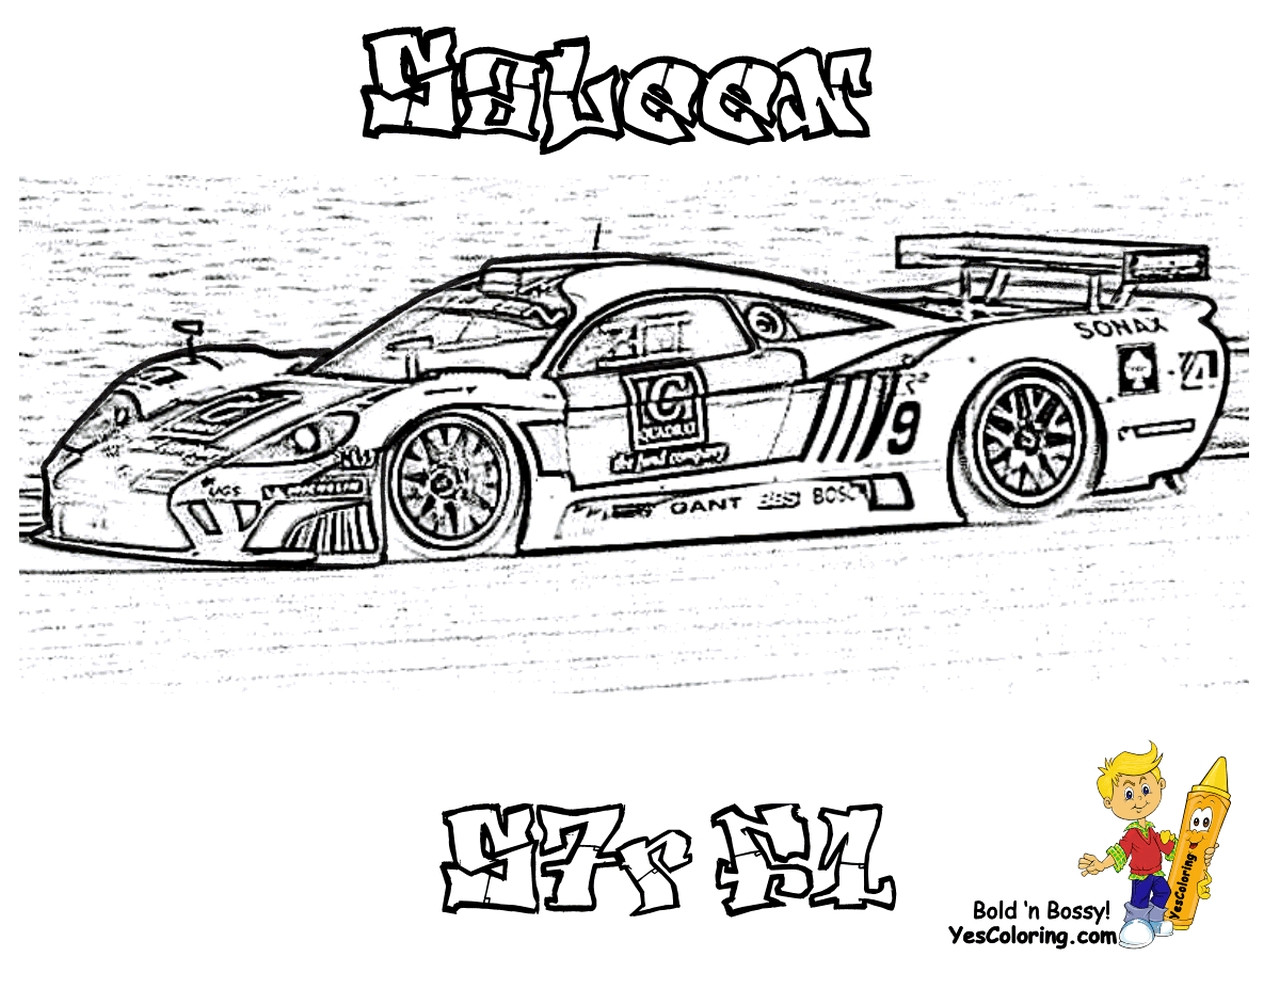 Printable Nascar Coloring Pages For Boys
 Get This Saleen Nascar racing car coloring pages for boys